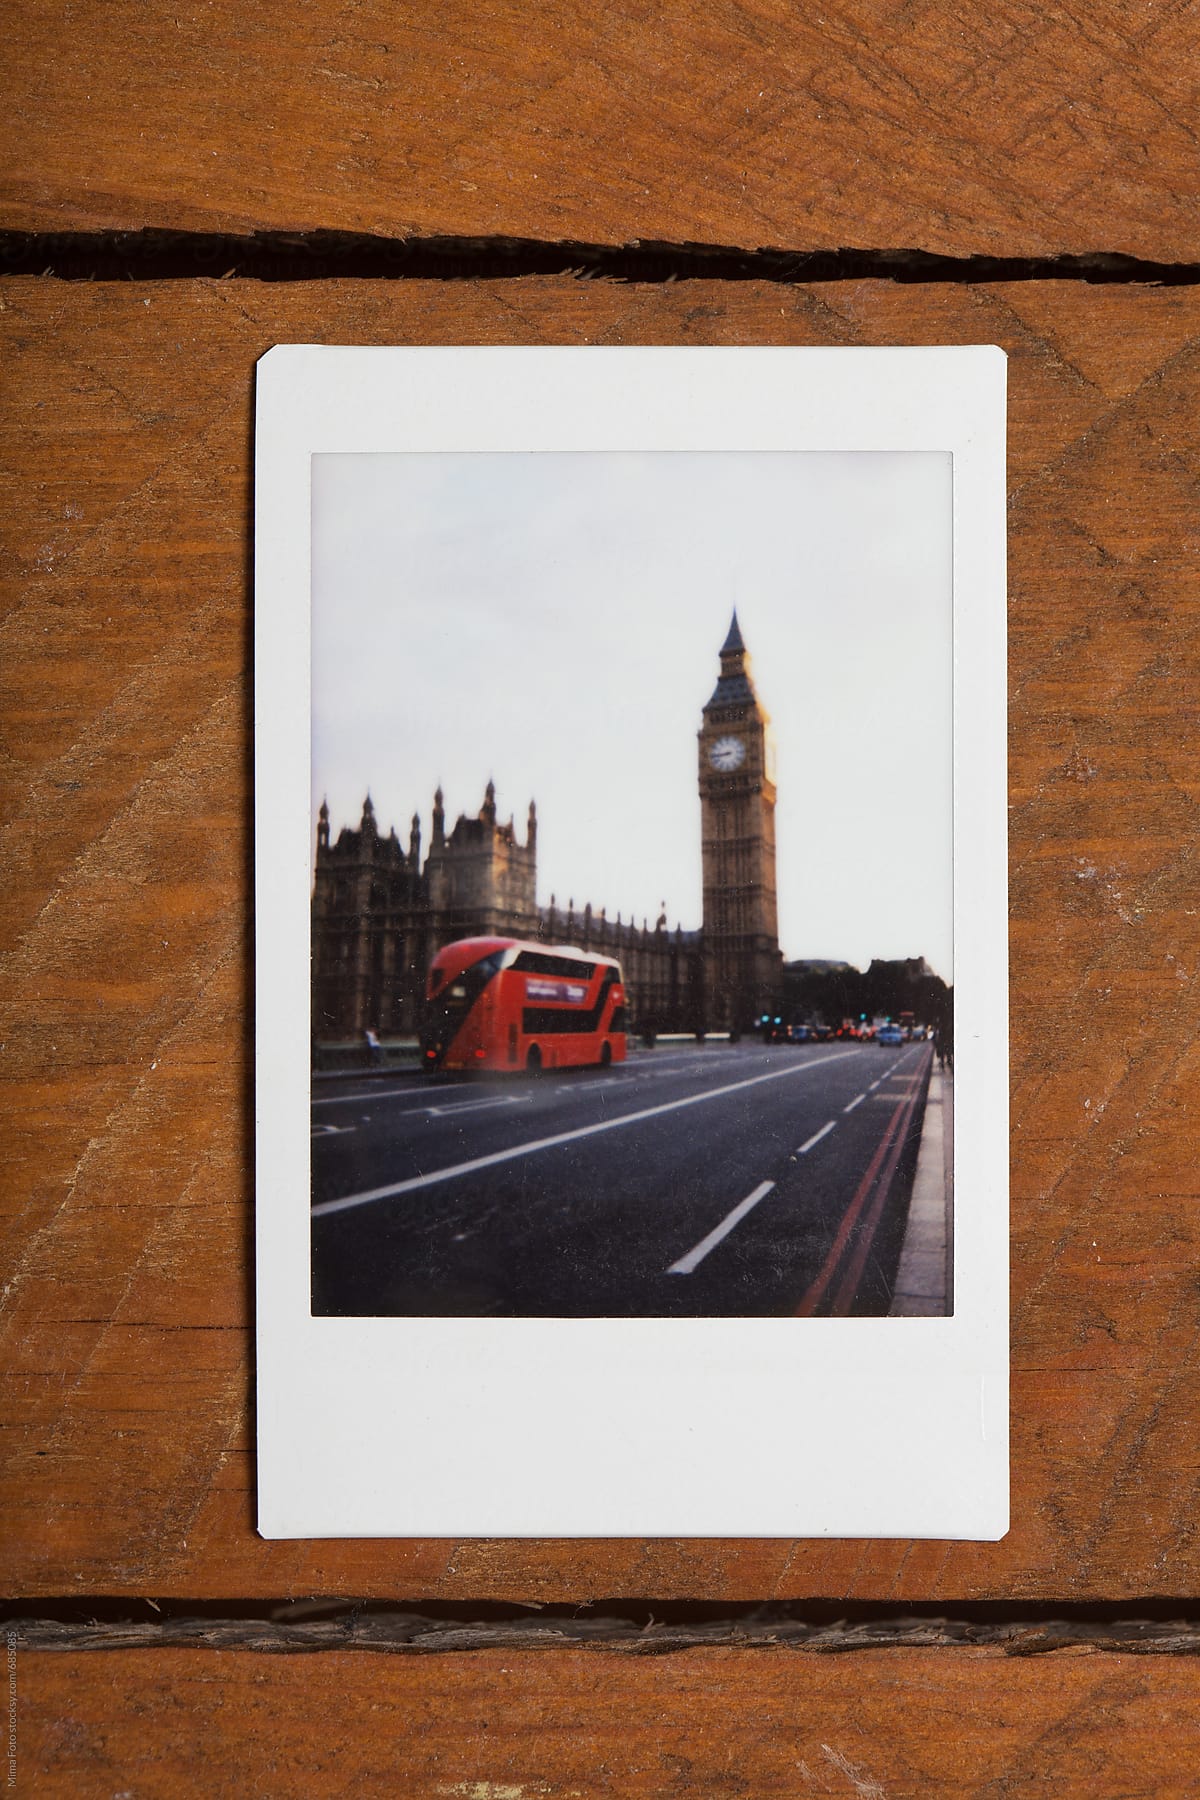 Instant photo showing Big Ben in London, England